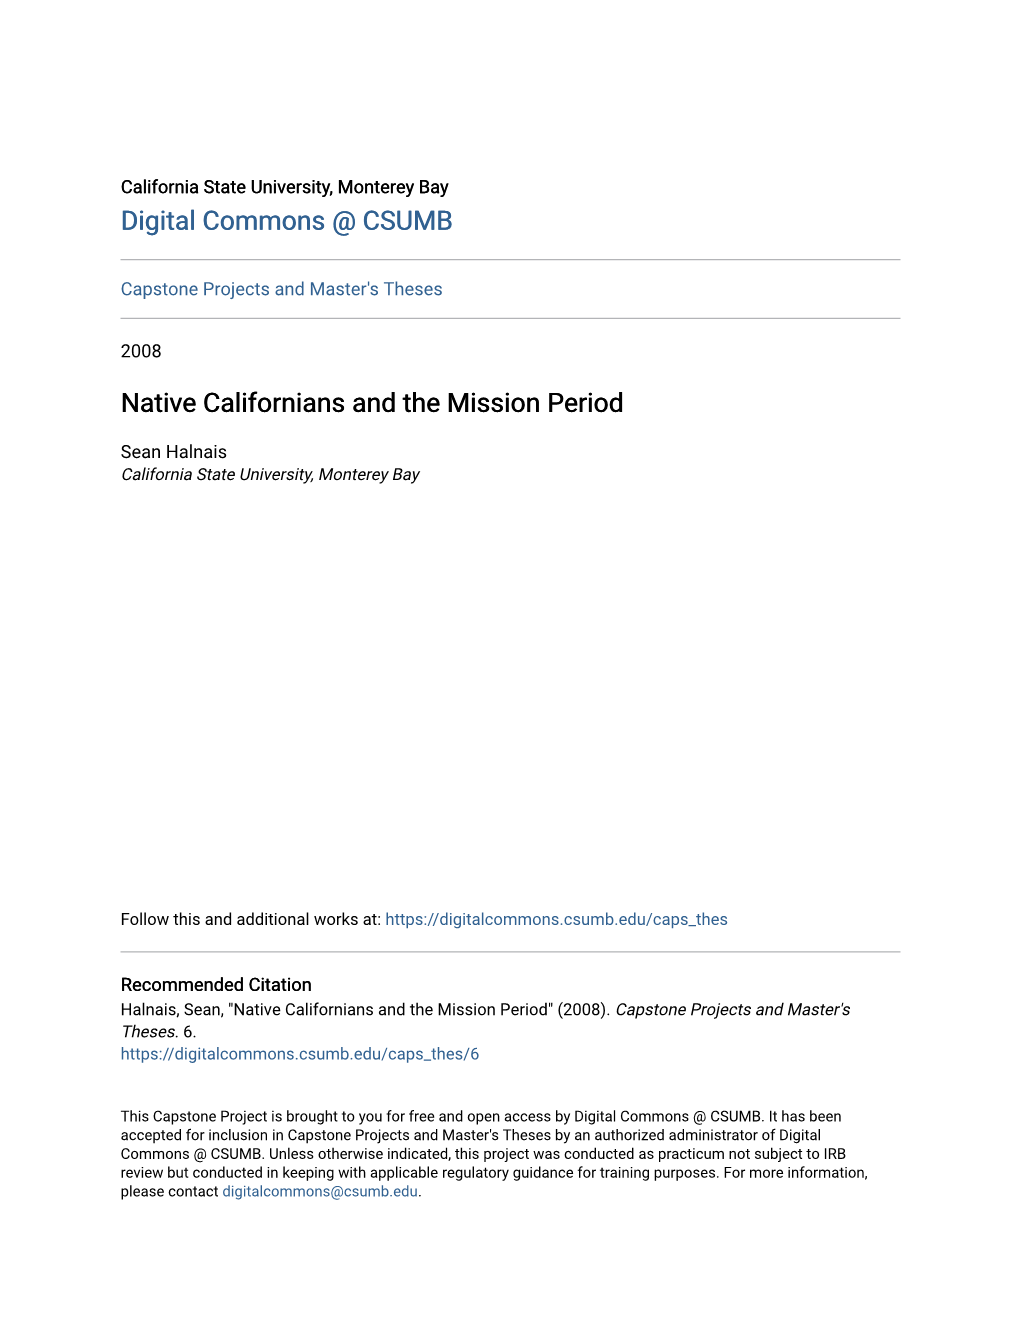 Native Californians and the Mission Period